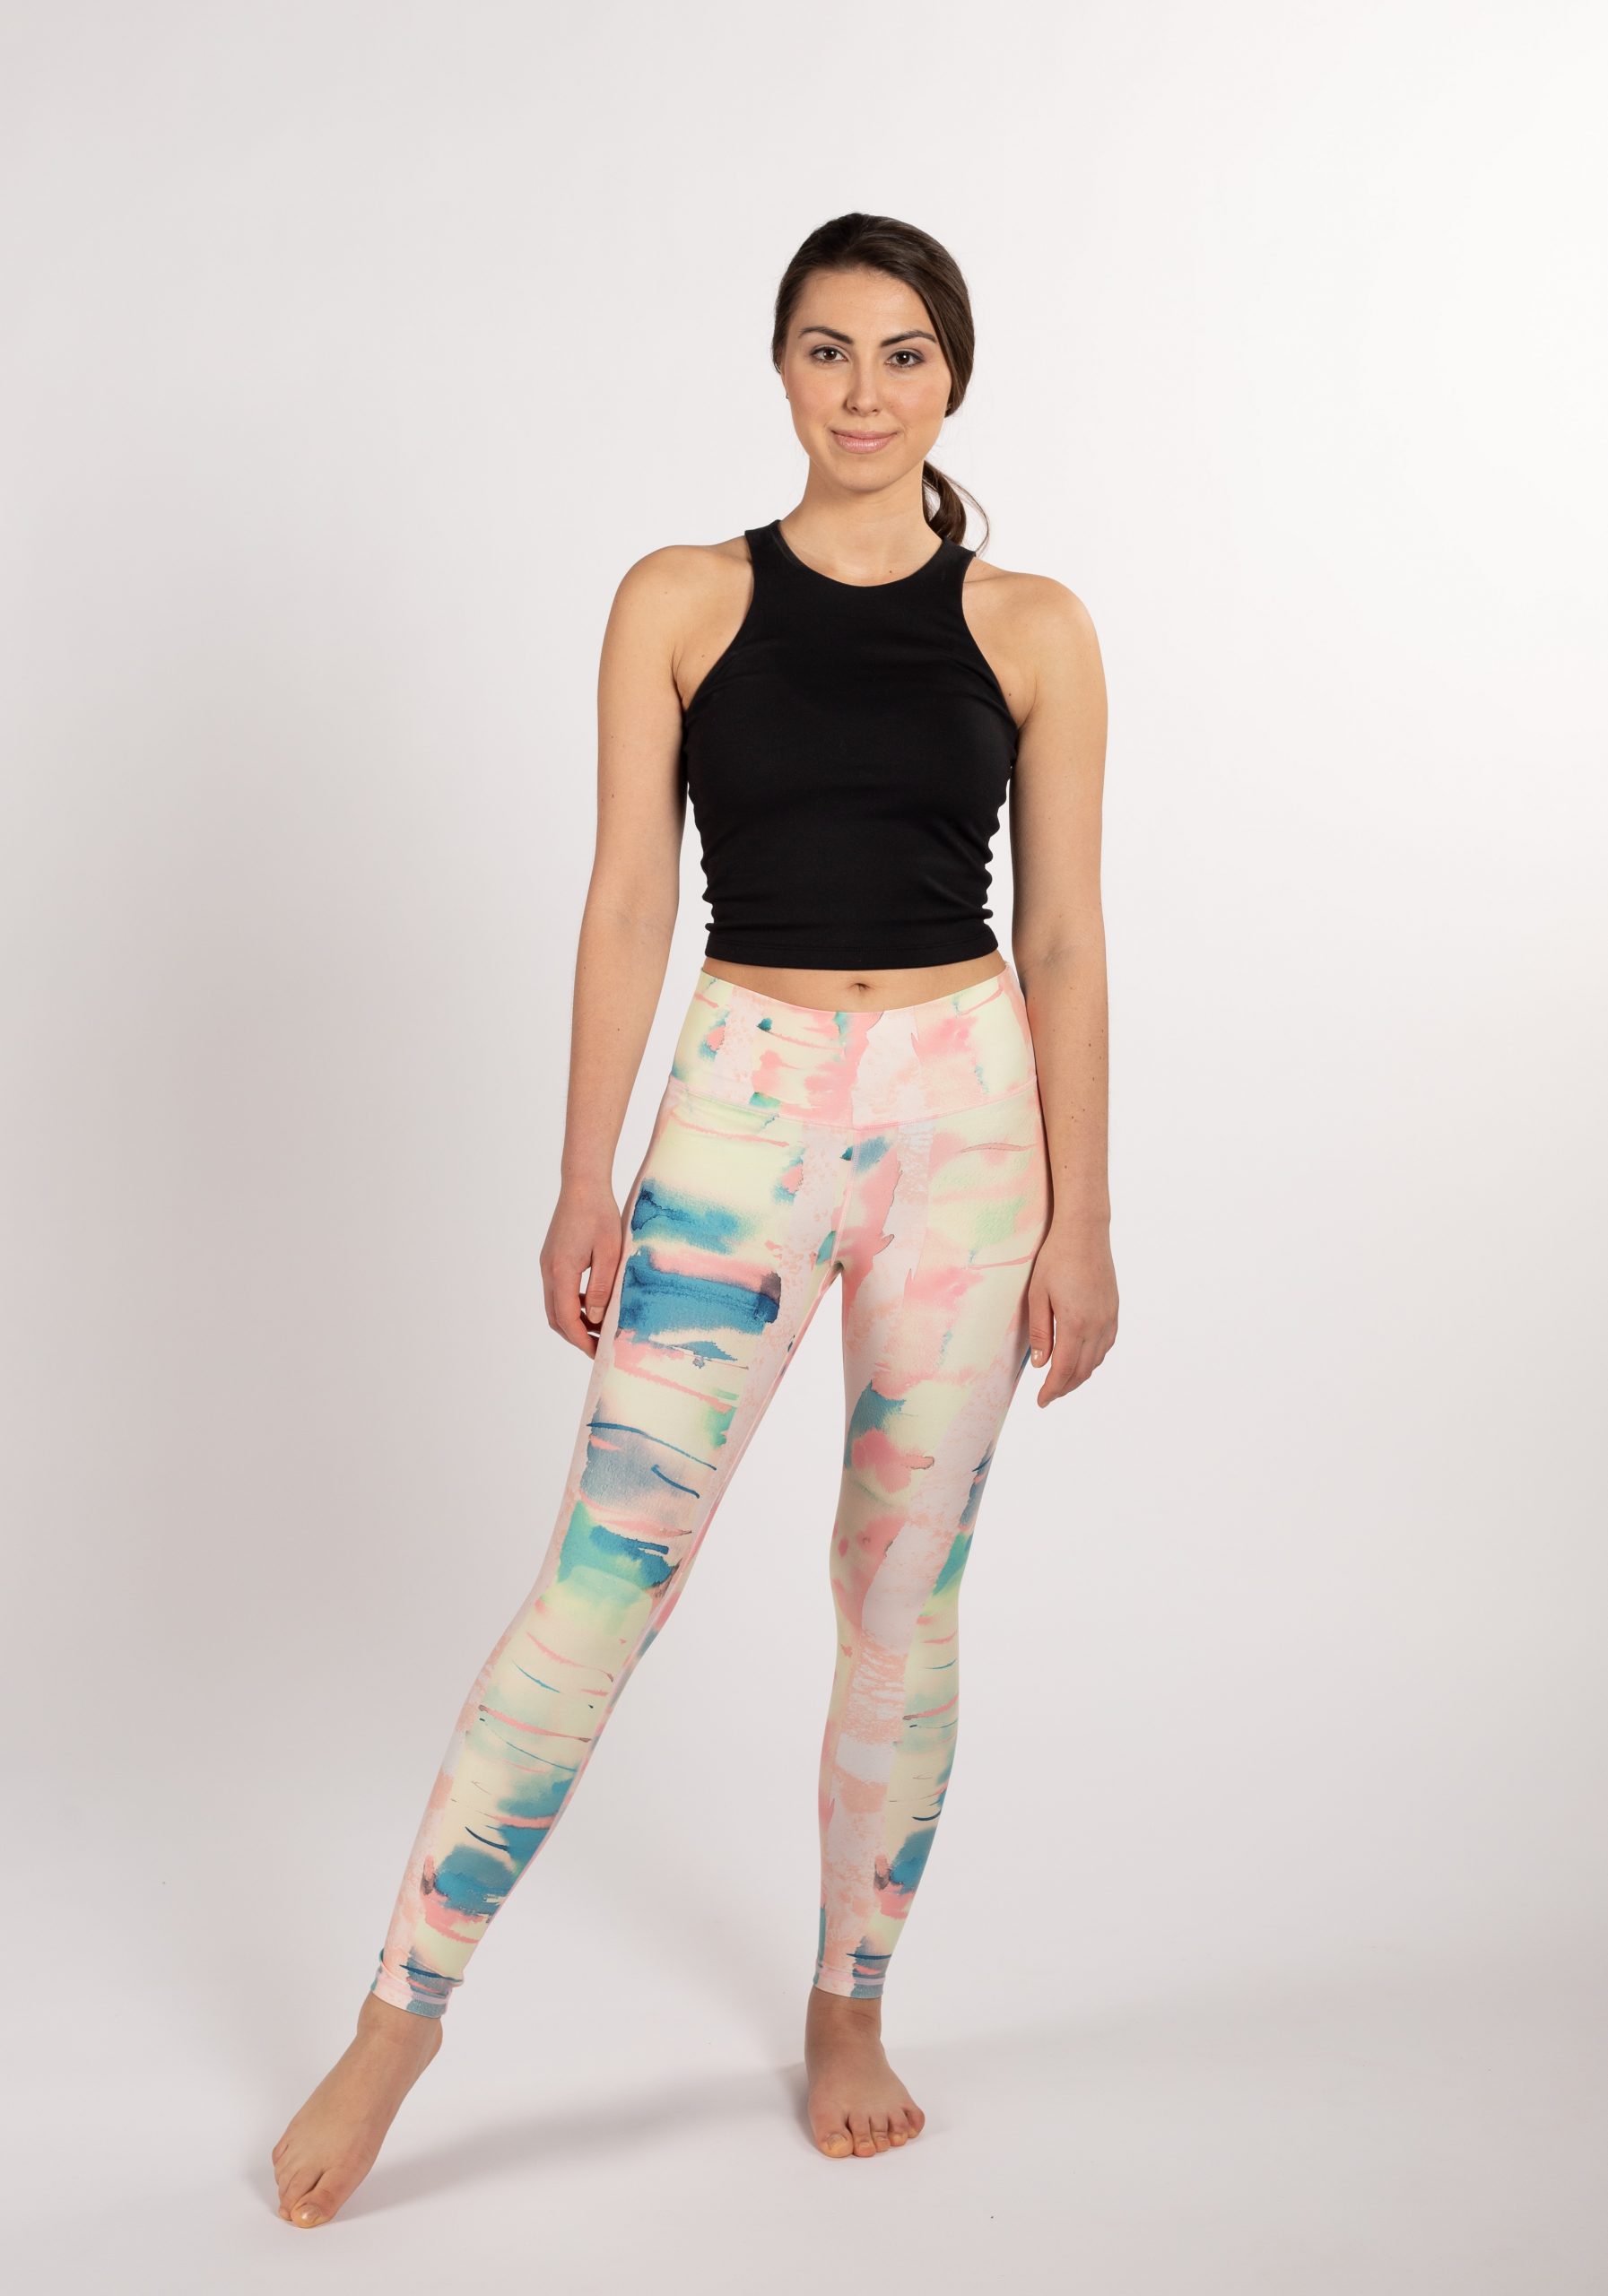 Patriot 2A Gun Flag Yoga Leggings from Rockstarlette Outdoors |  Rockstarlette Outdoors, Adventure Inspired Activewear Made in USA